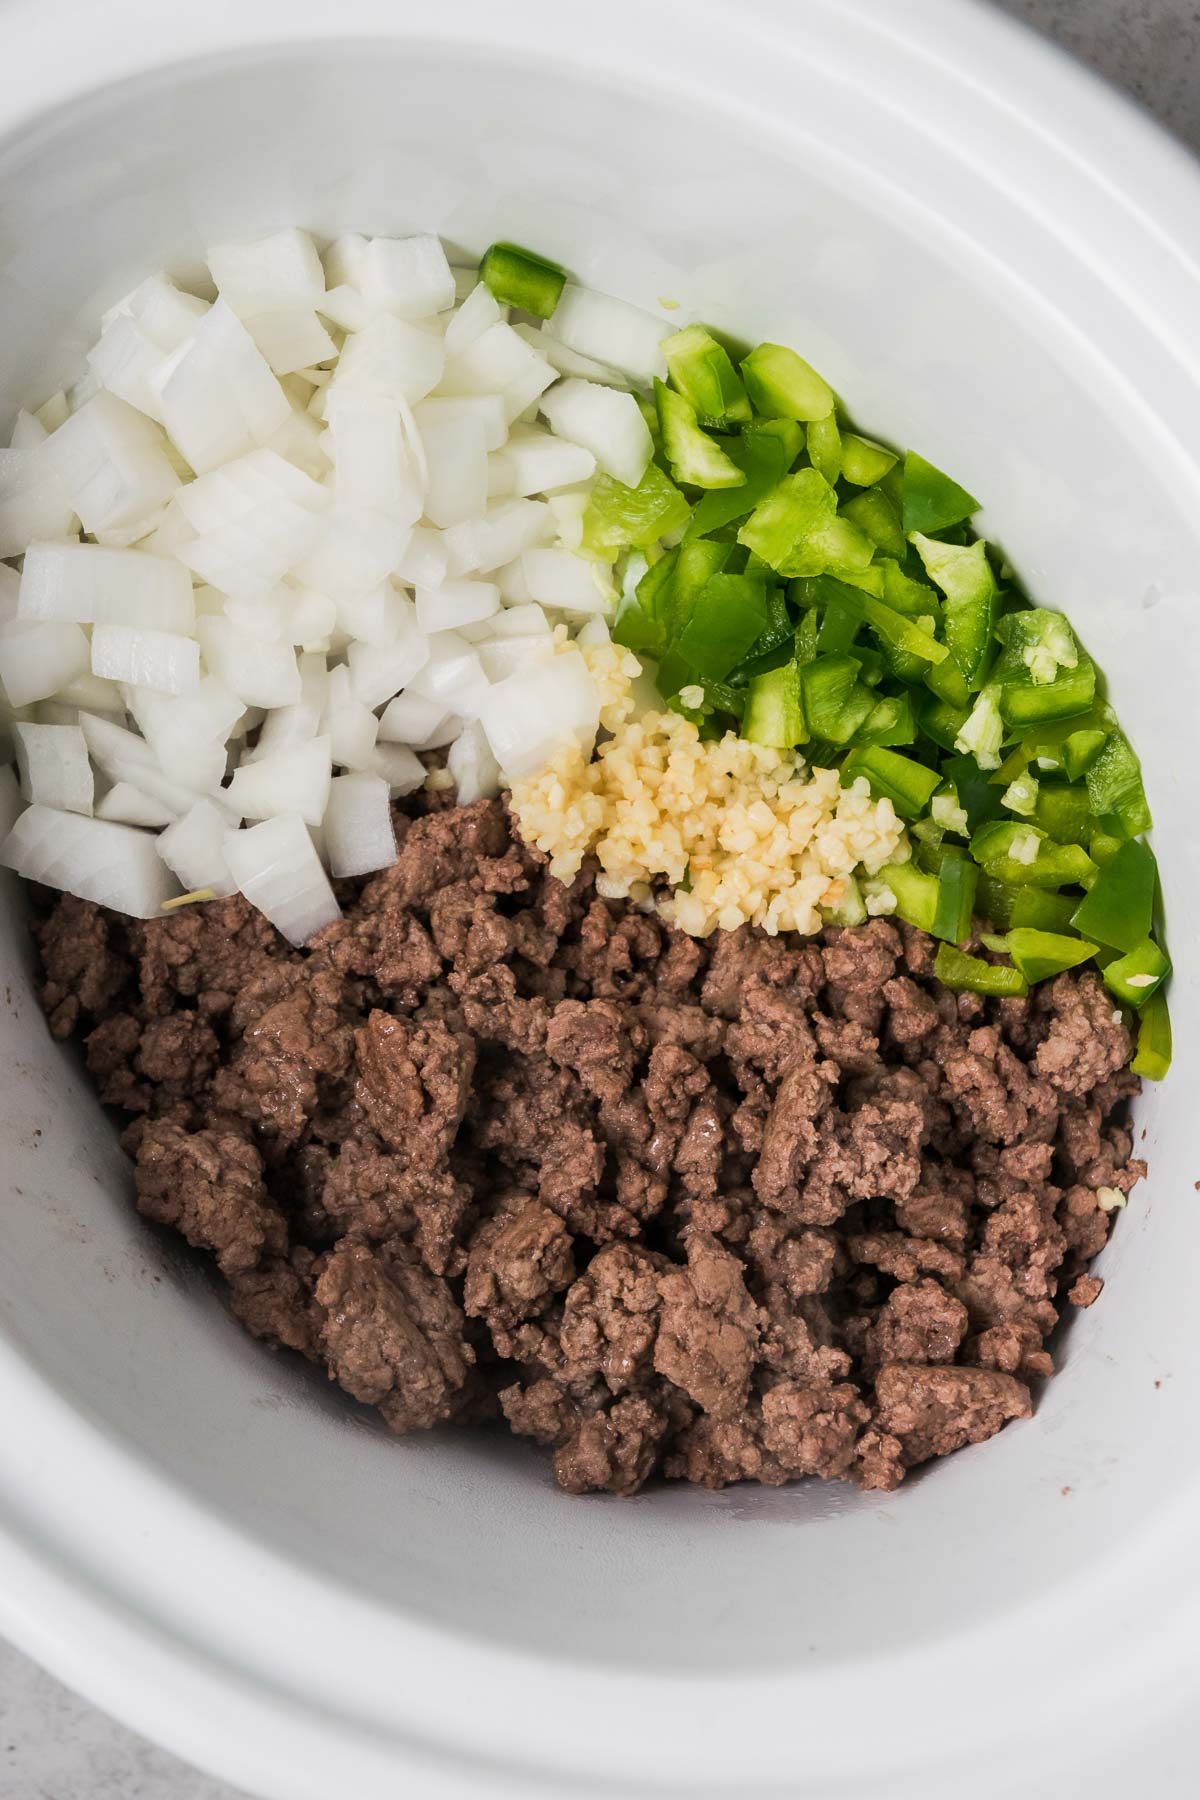 Ground beef and veggies in a crock pot.